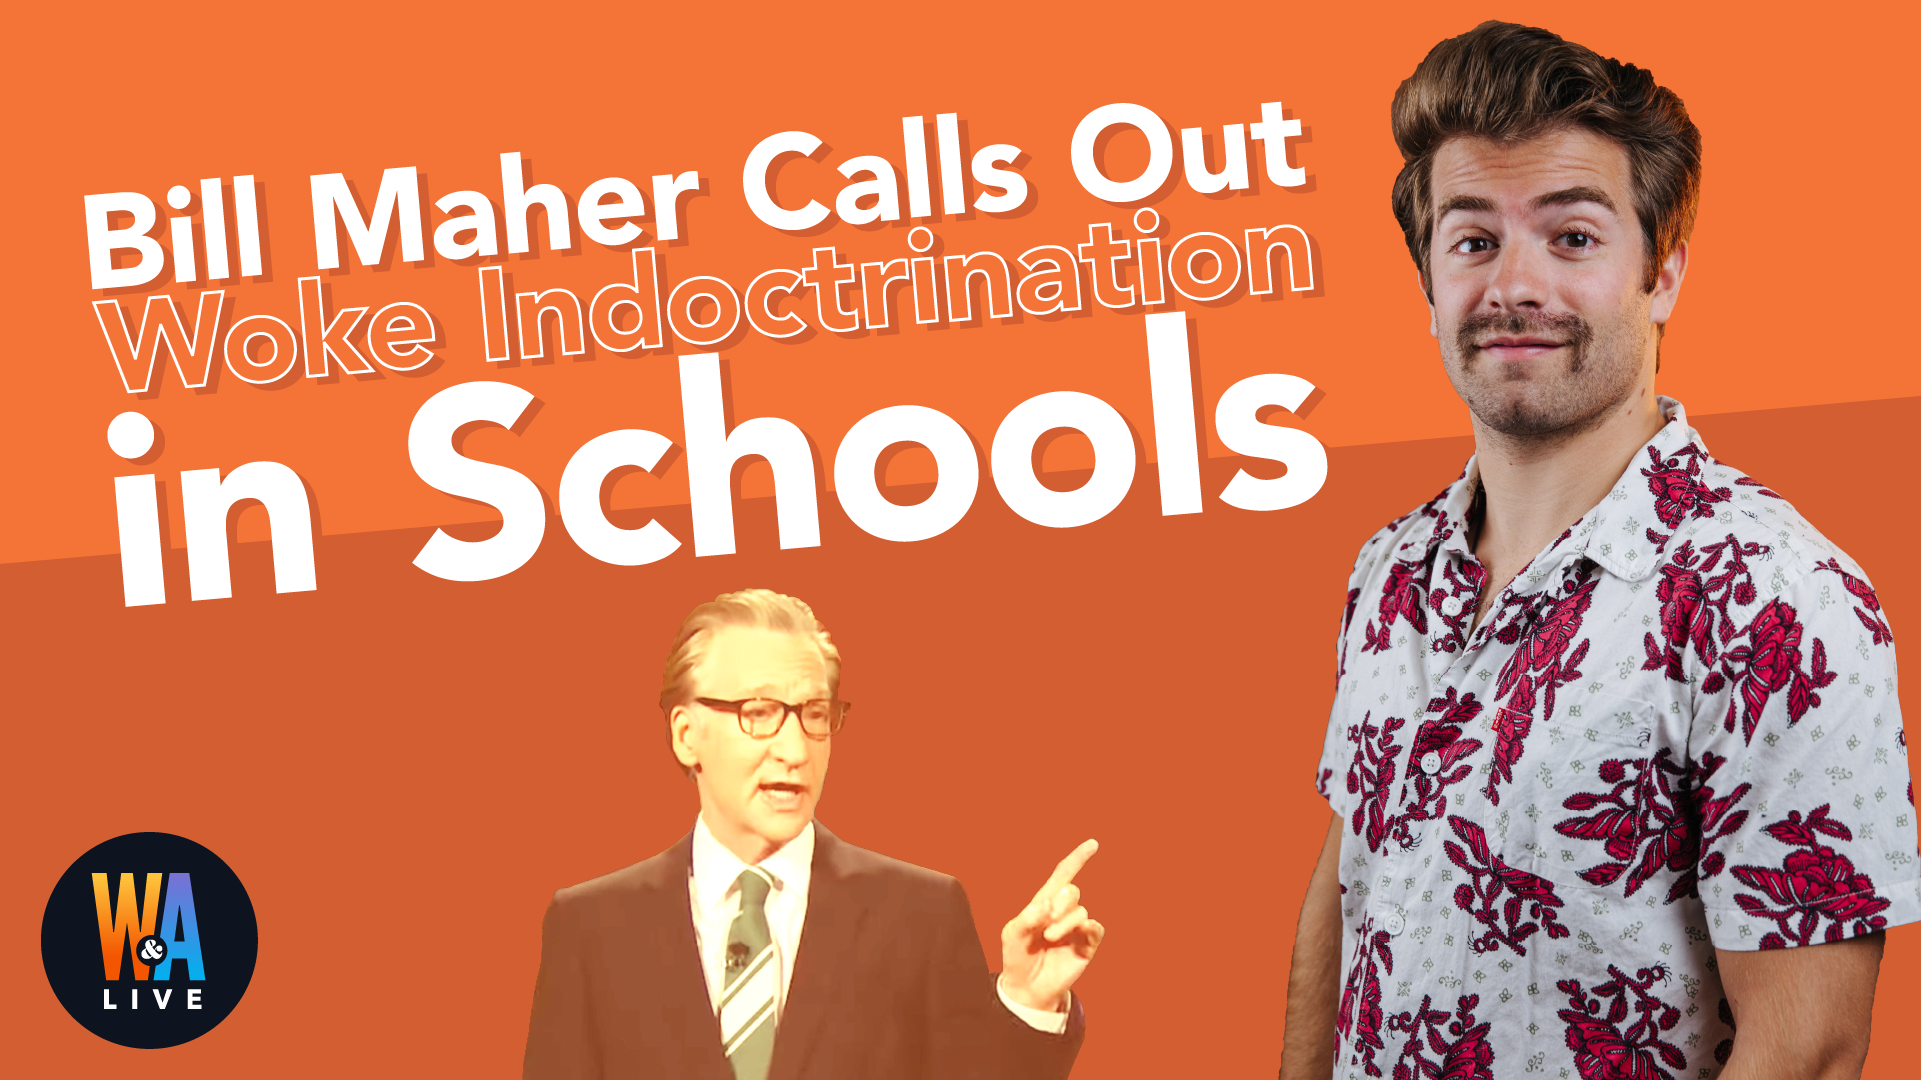 Bill Maher Calls Out Woke Indoctrination in Schools